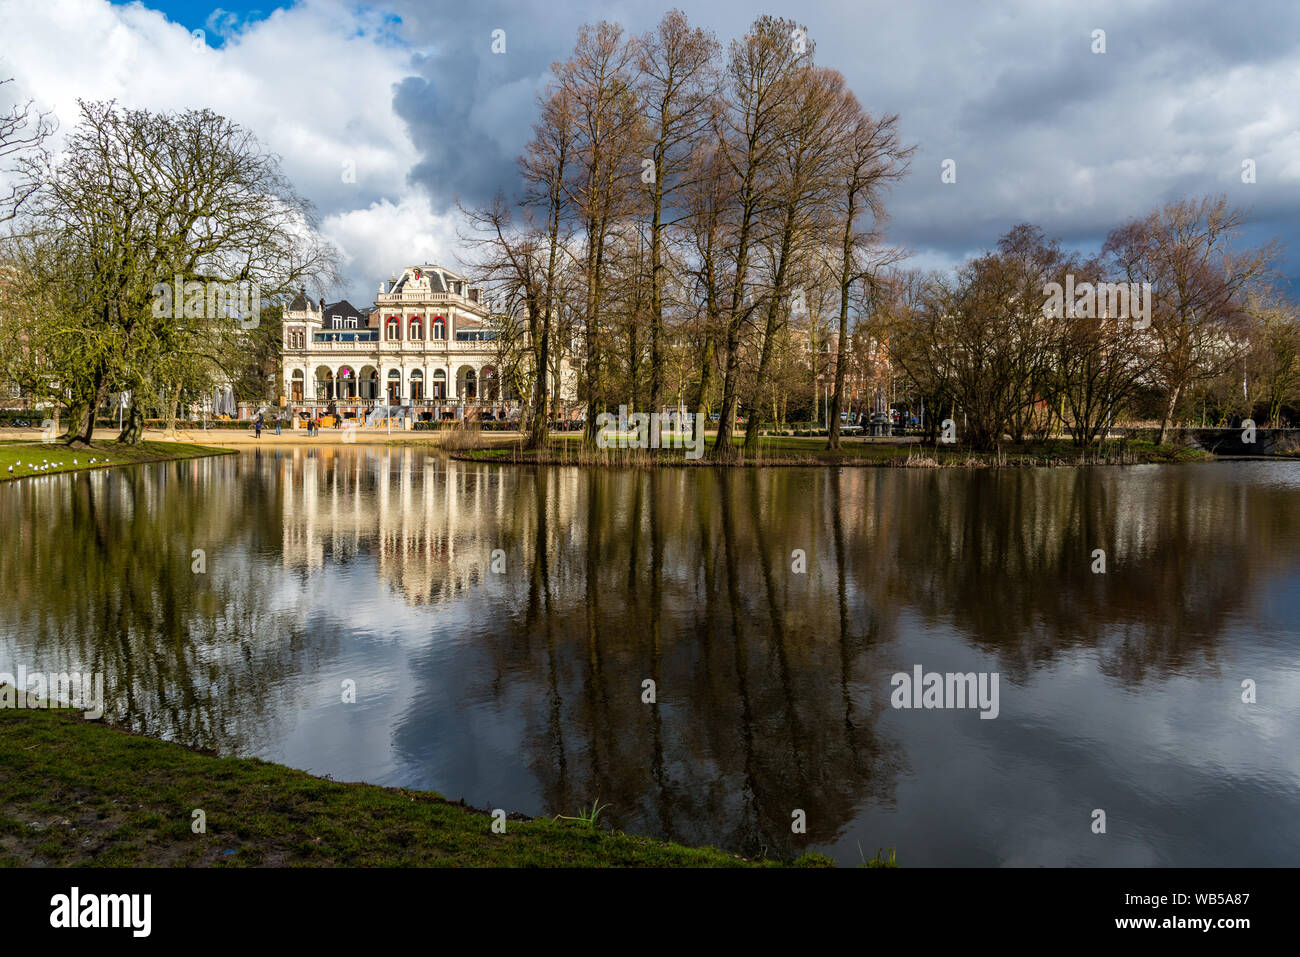 View over the water in Amsterdam Vondelpark during autumn on a bright day reflecting trees in the water Stock Photo